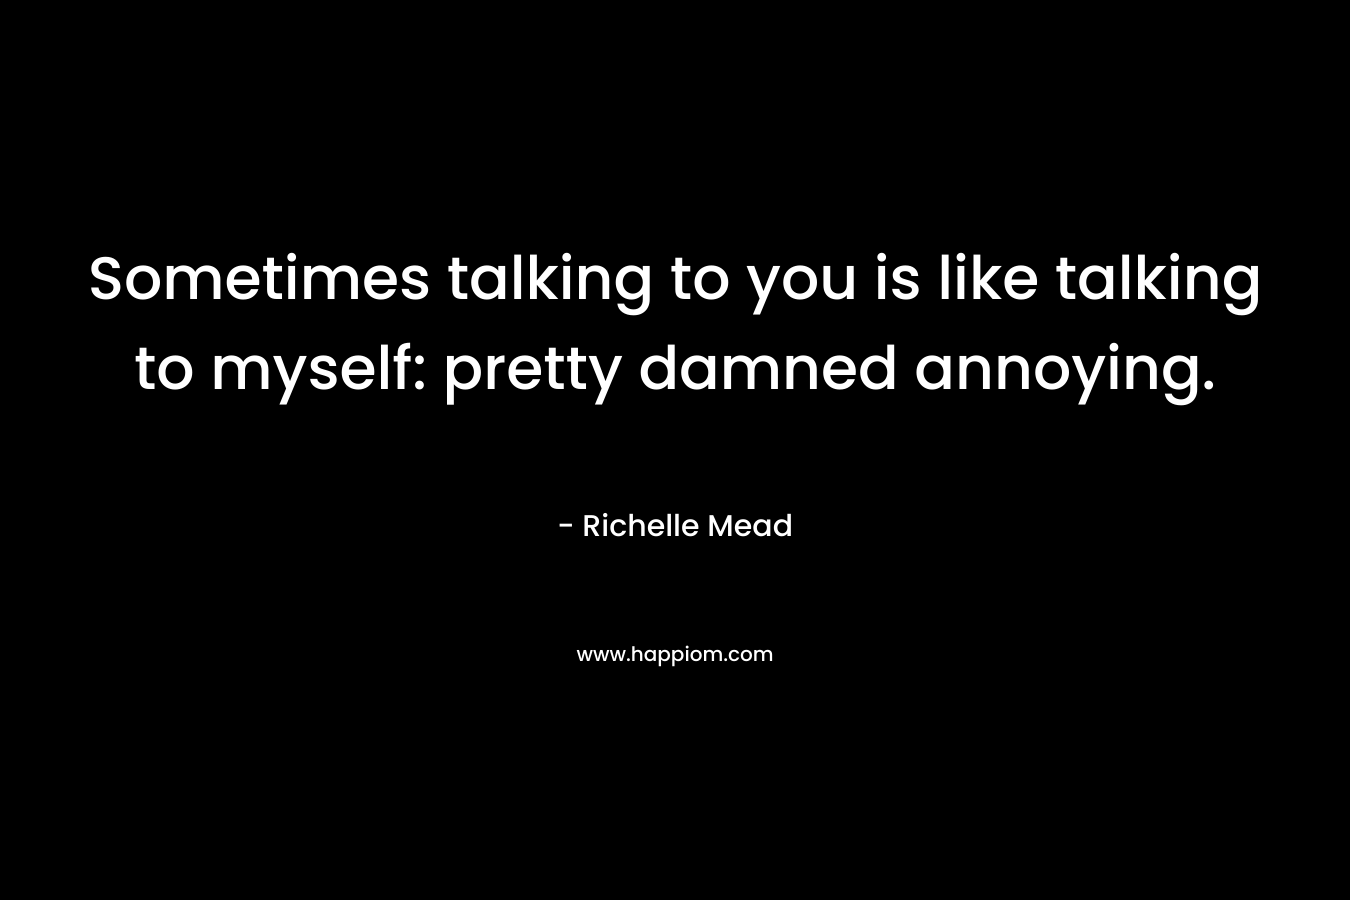 Sometimes talking to you is like talking to myself: pretty damned annoying. – Richelle Mead